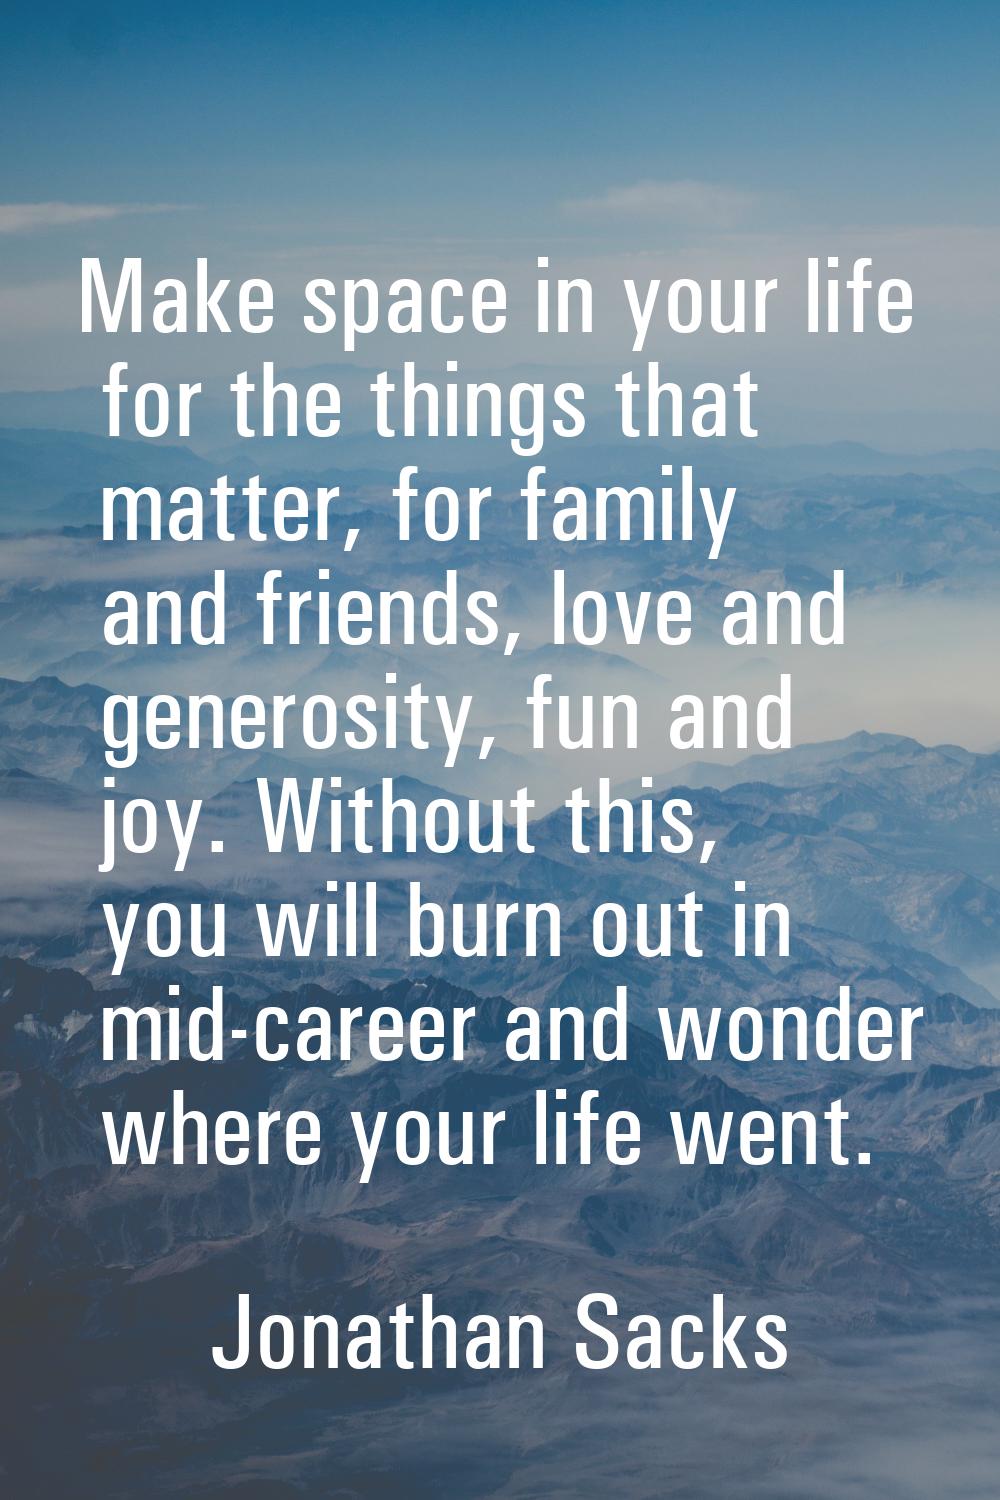 Make space in your life for the things that matter, for family and friends, love and generosity, fu